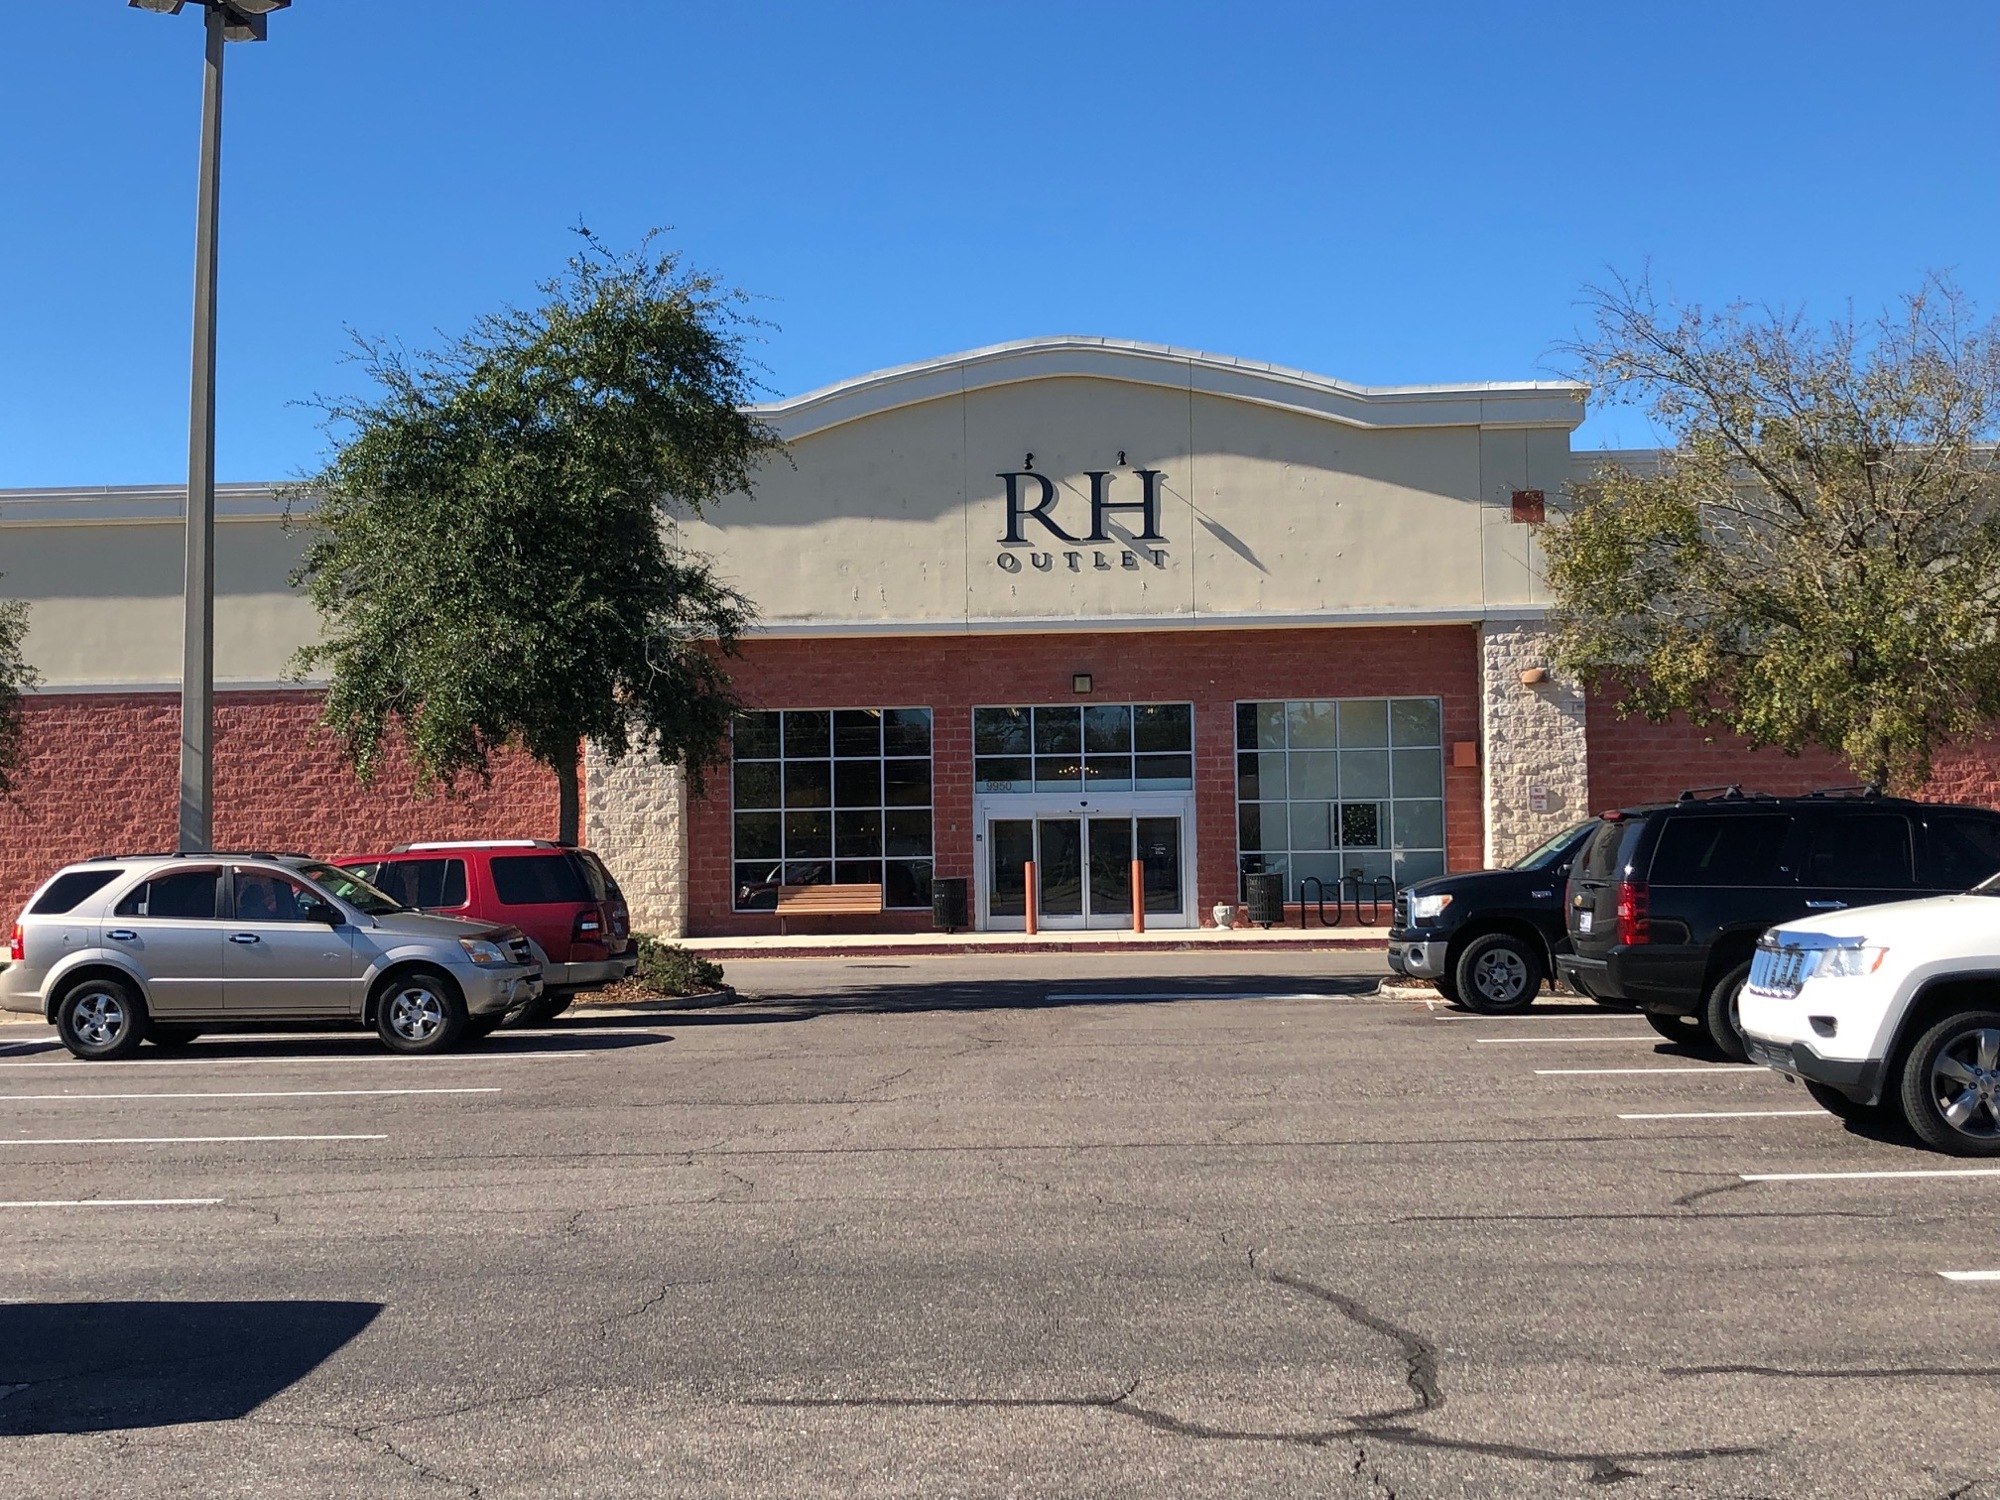 Restoration Hardware notified customers the RH Outlet at 9950 Southside Blvd. is “closing soon.” Urban Air Adventure Park wants to open there.